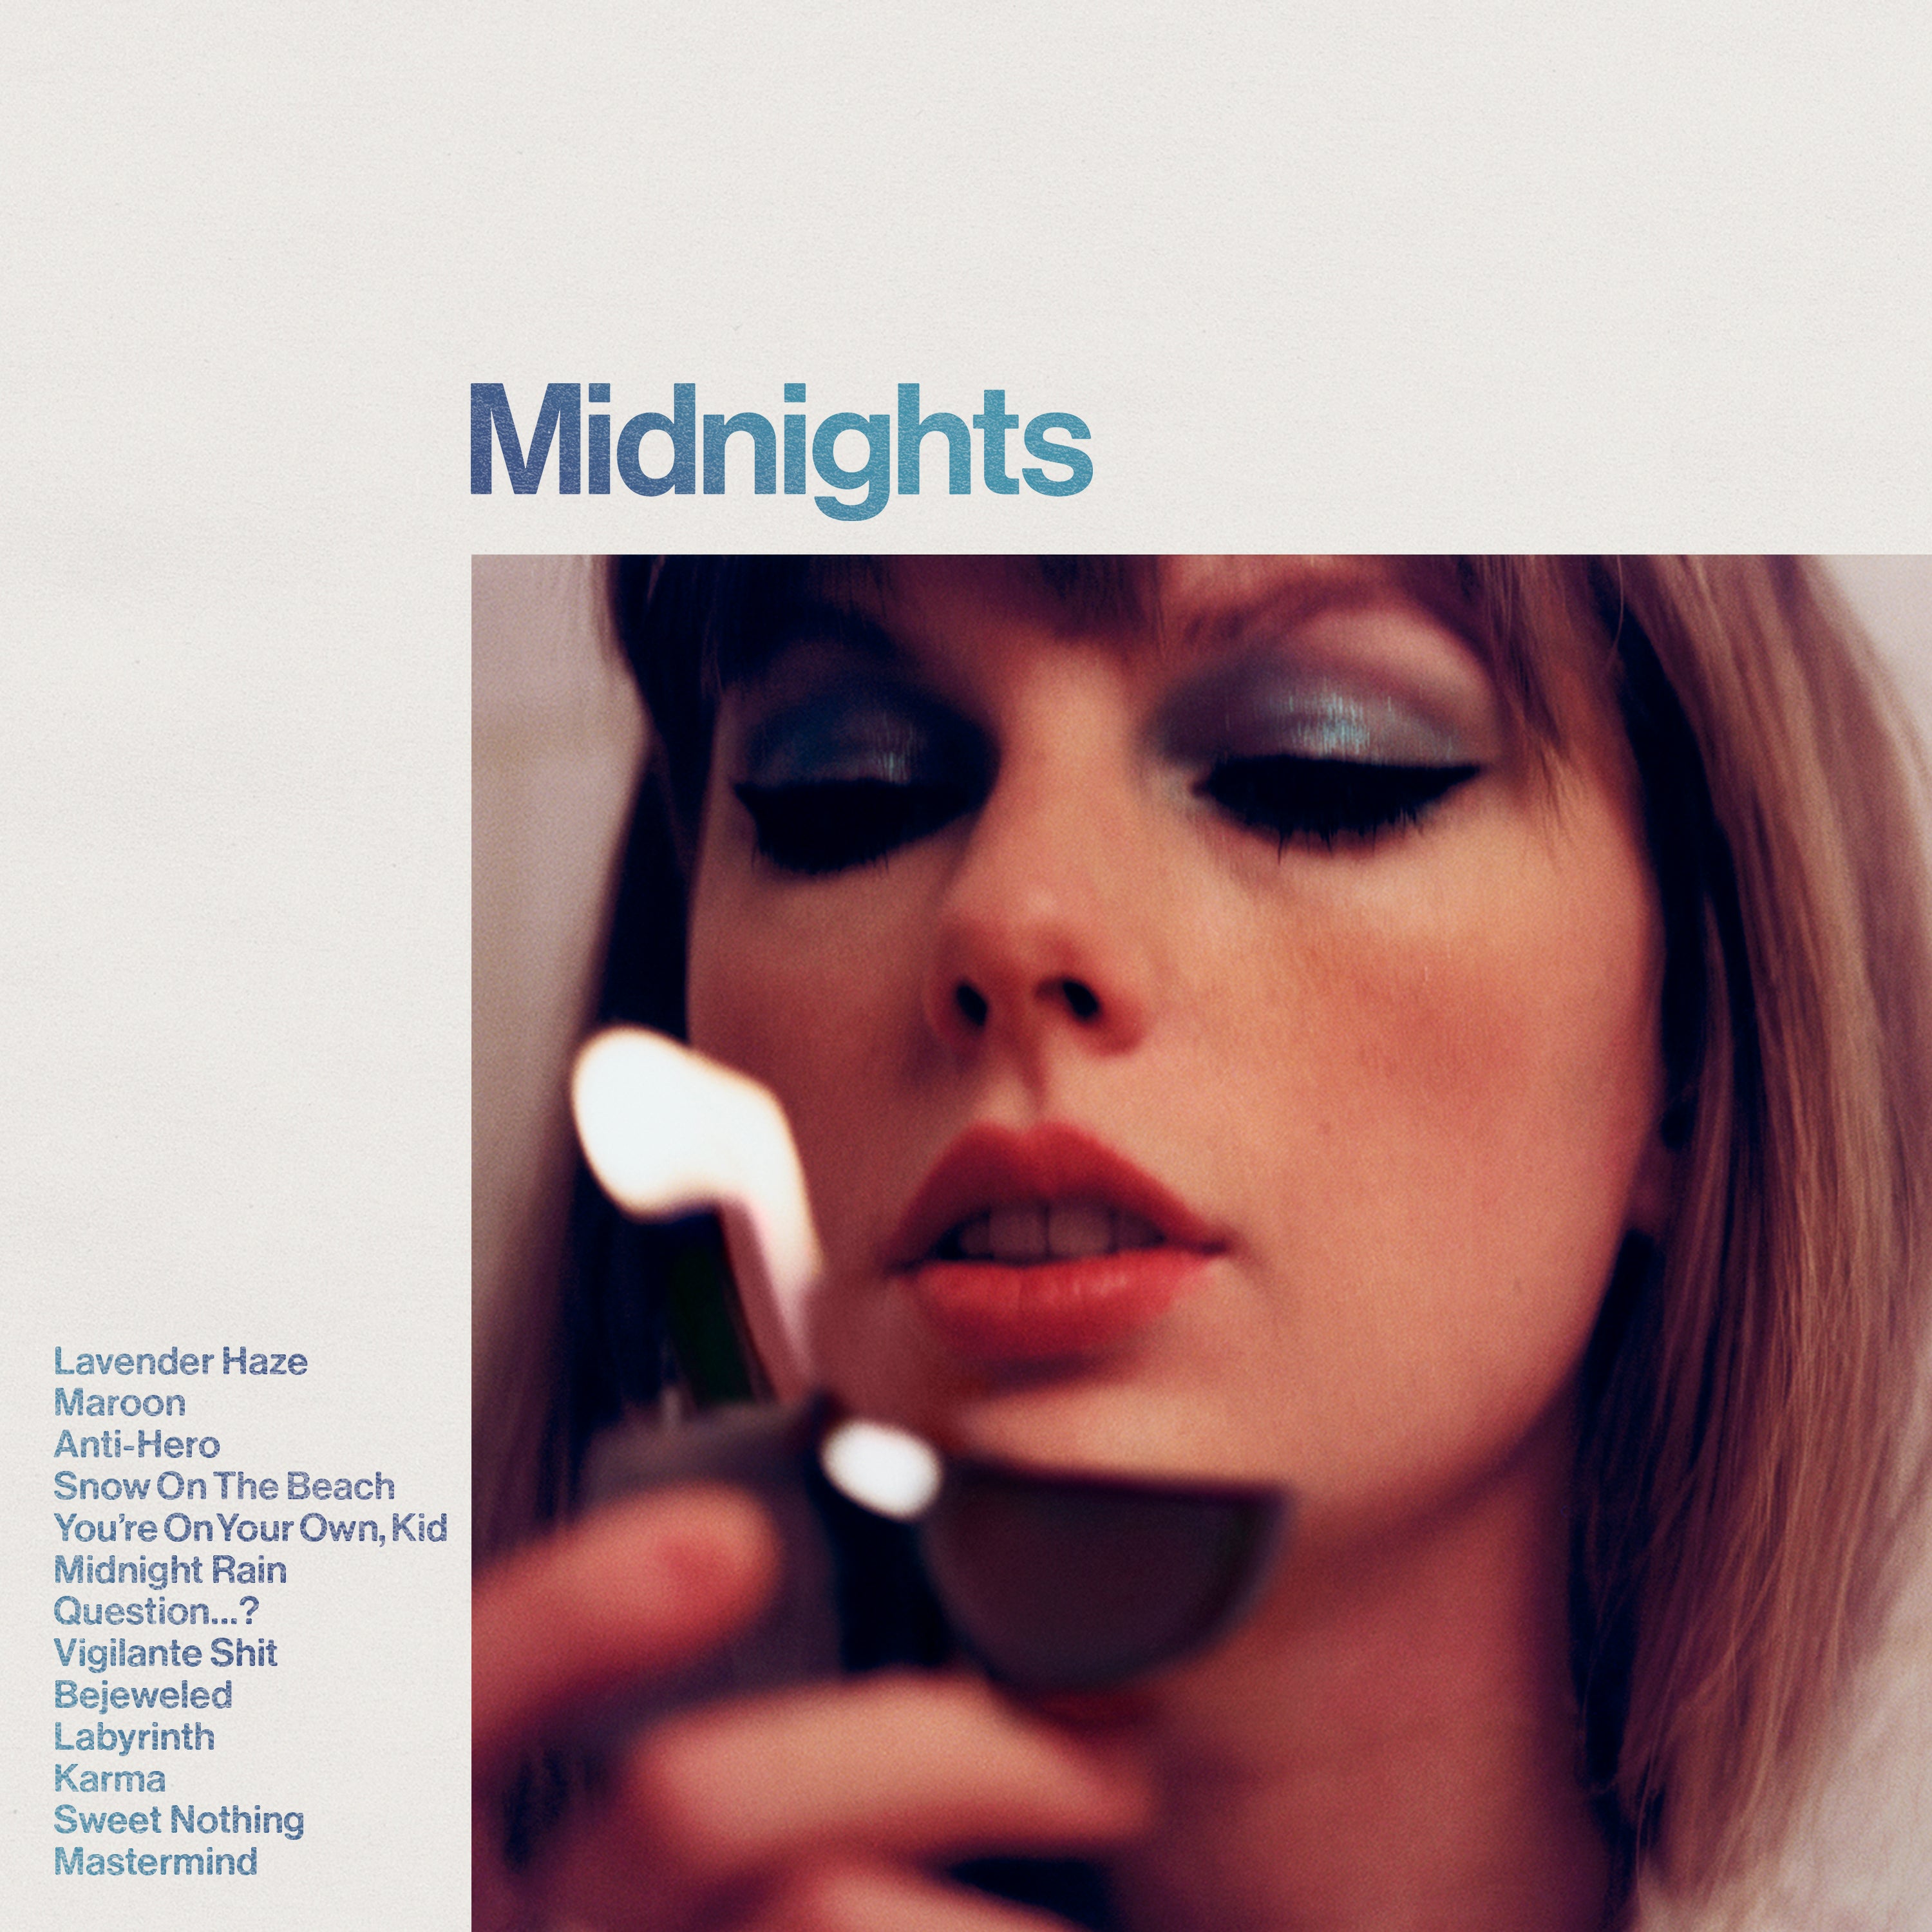 Light relief: the sleeve of Taylor Swift’s ‘Midnights’